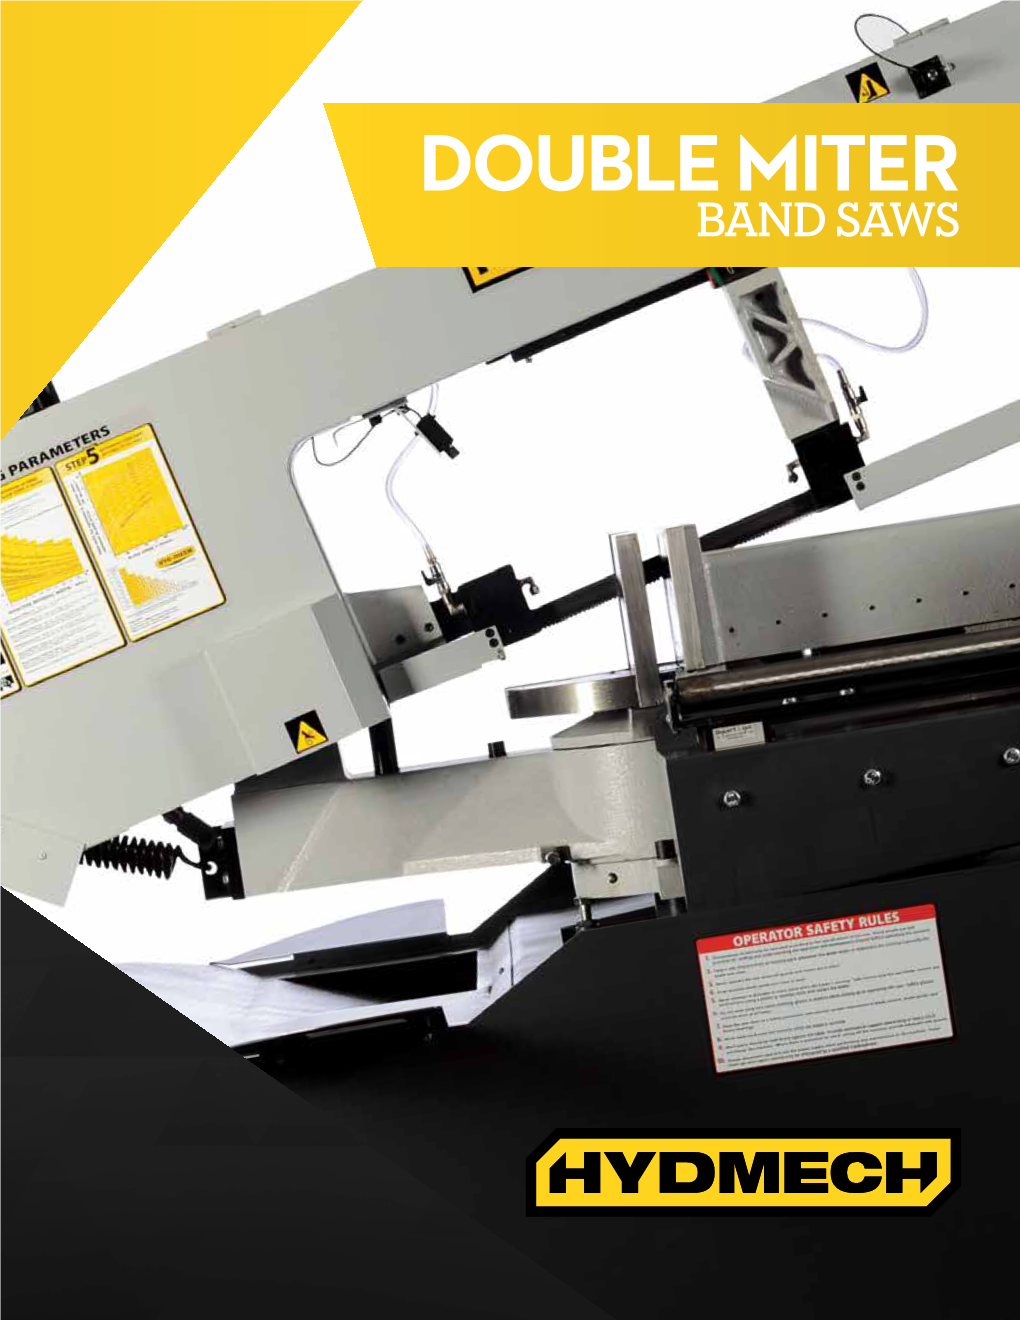 View Double Miter Band Saw Brochure